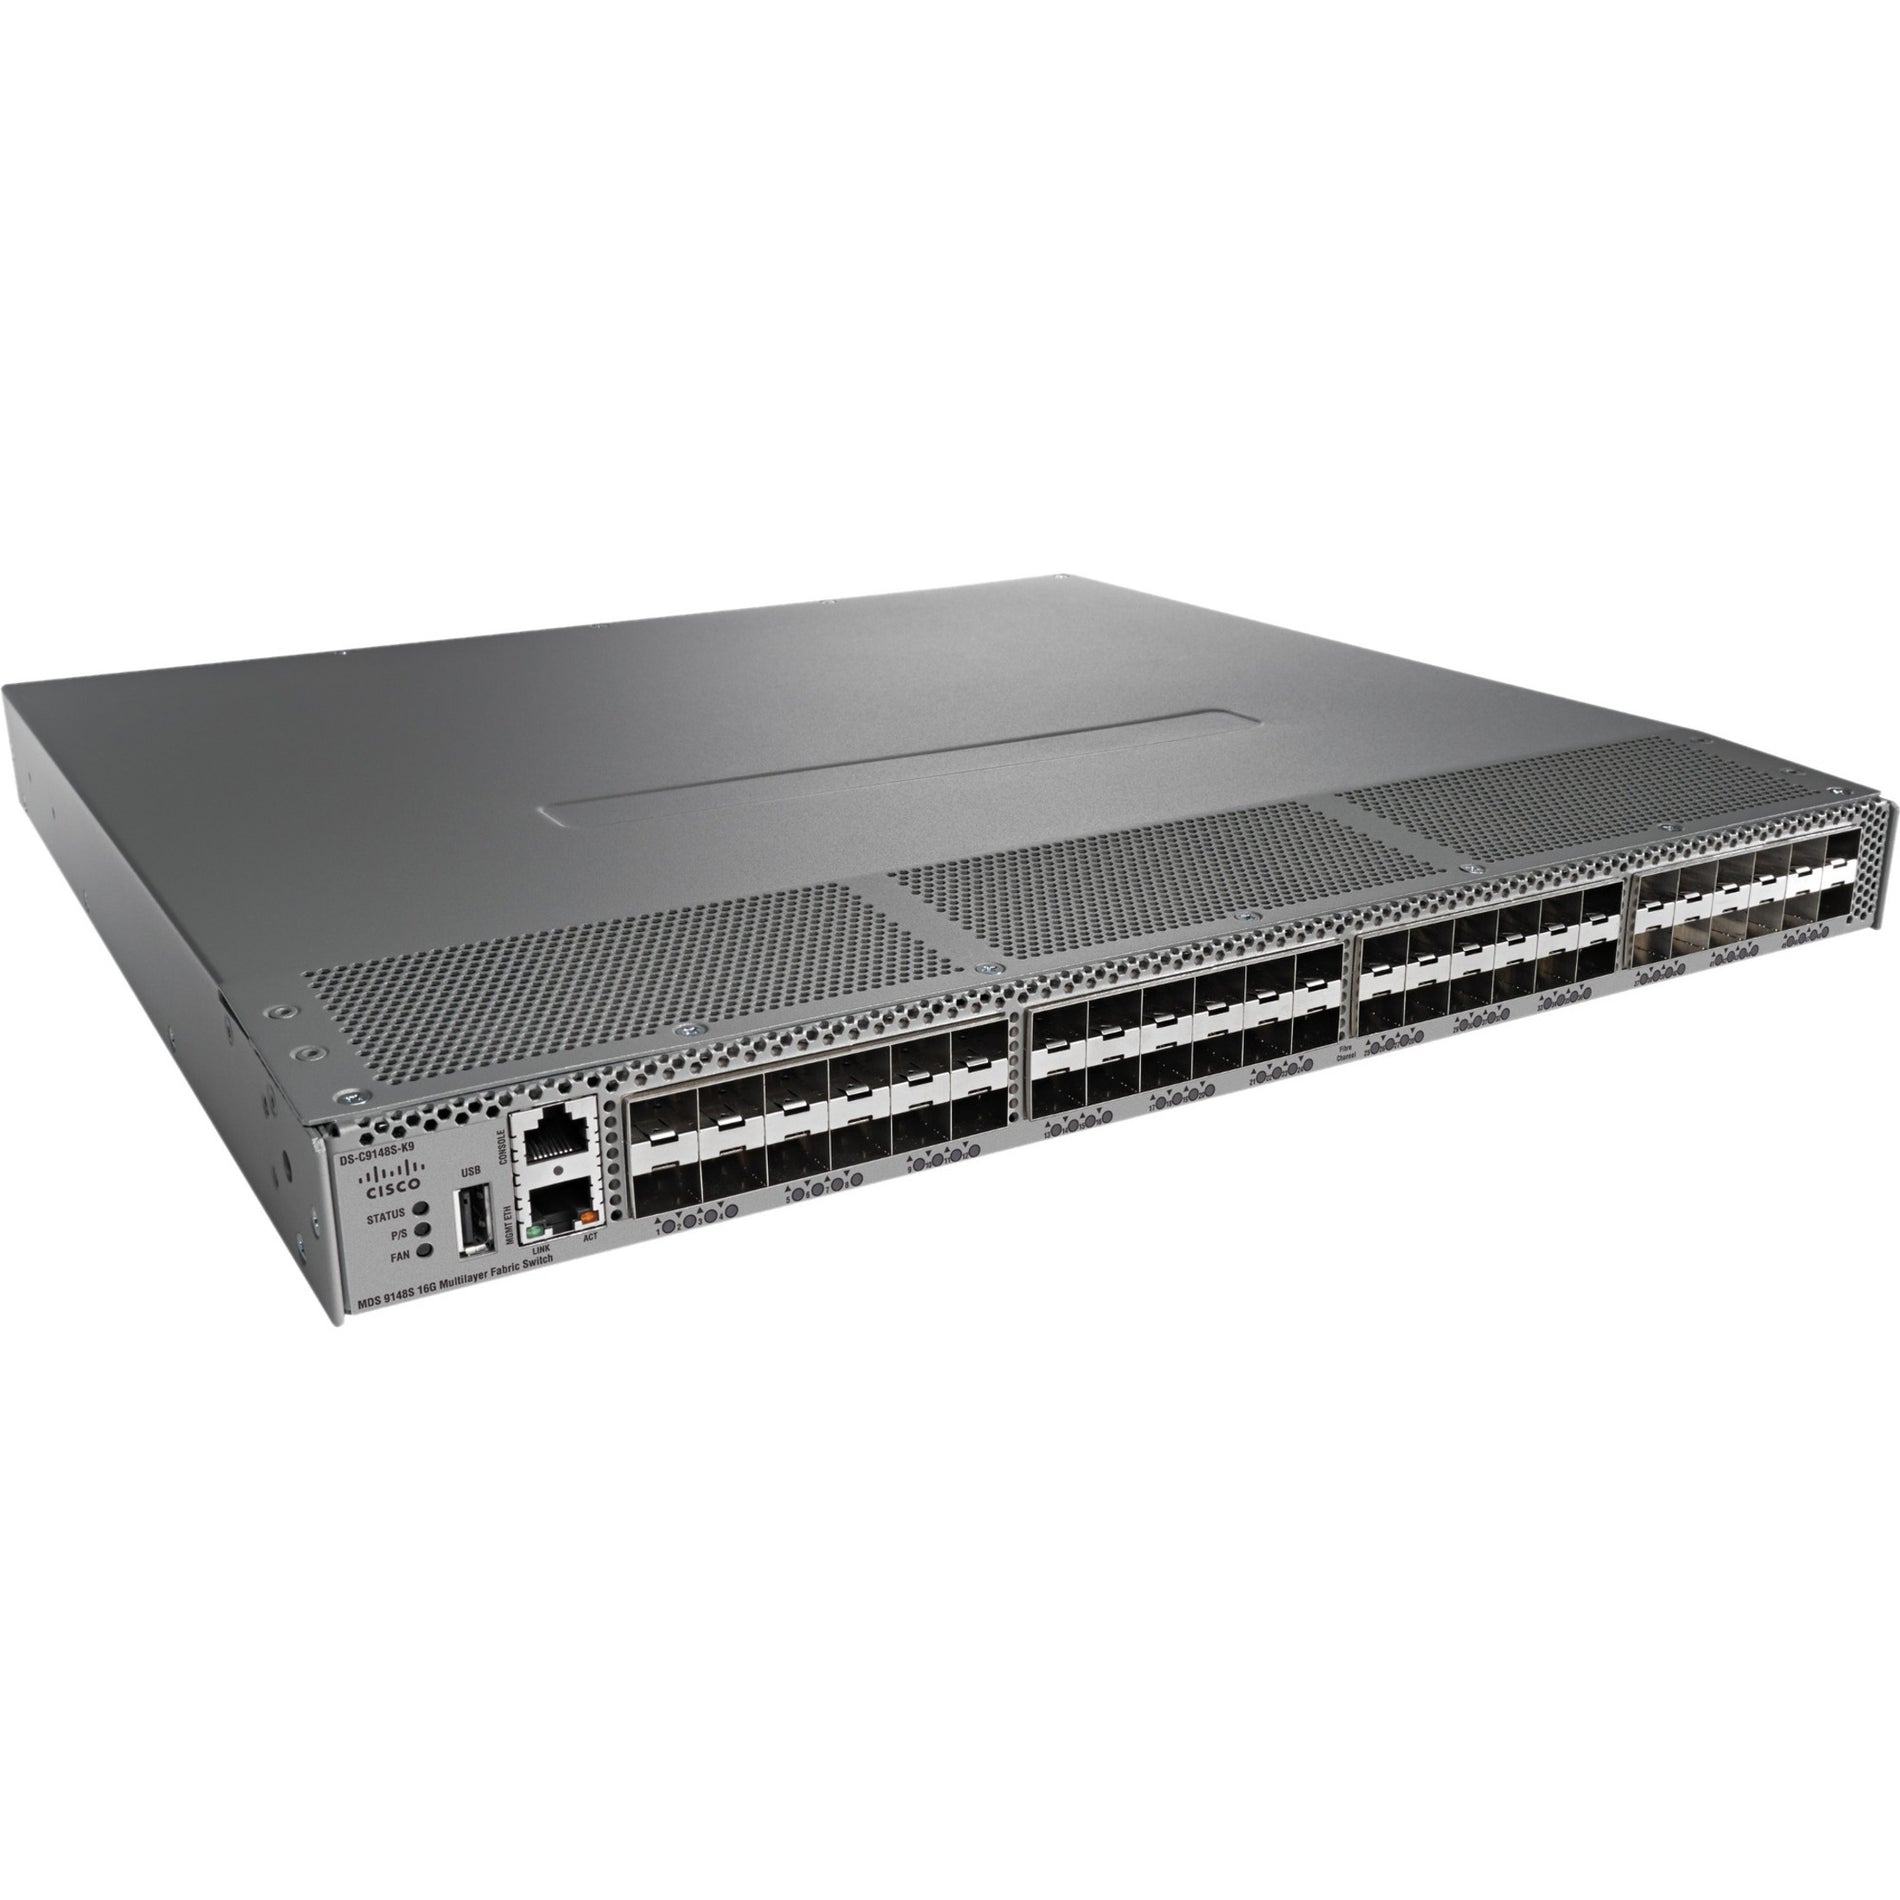 Cisco DS-C9148S-12PK9 MDS 9148S 16G FC Switch with 12 Active Ports, Fibre Channel Switch